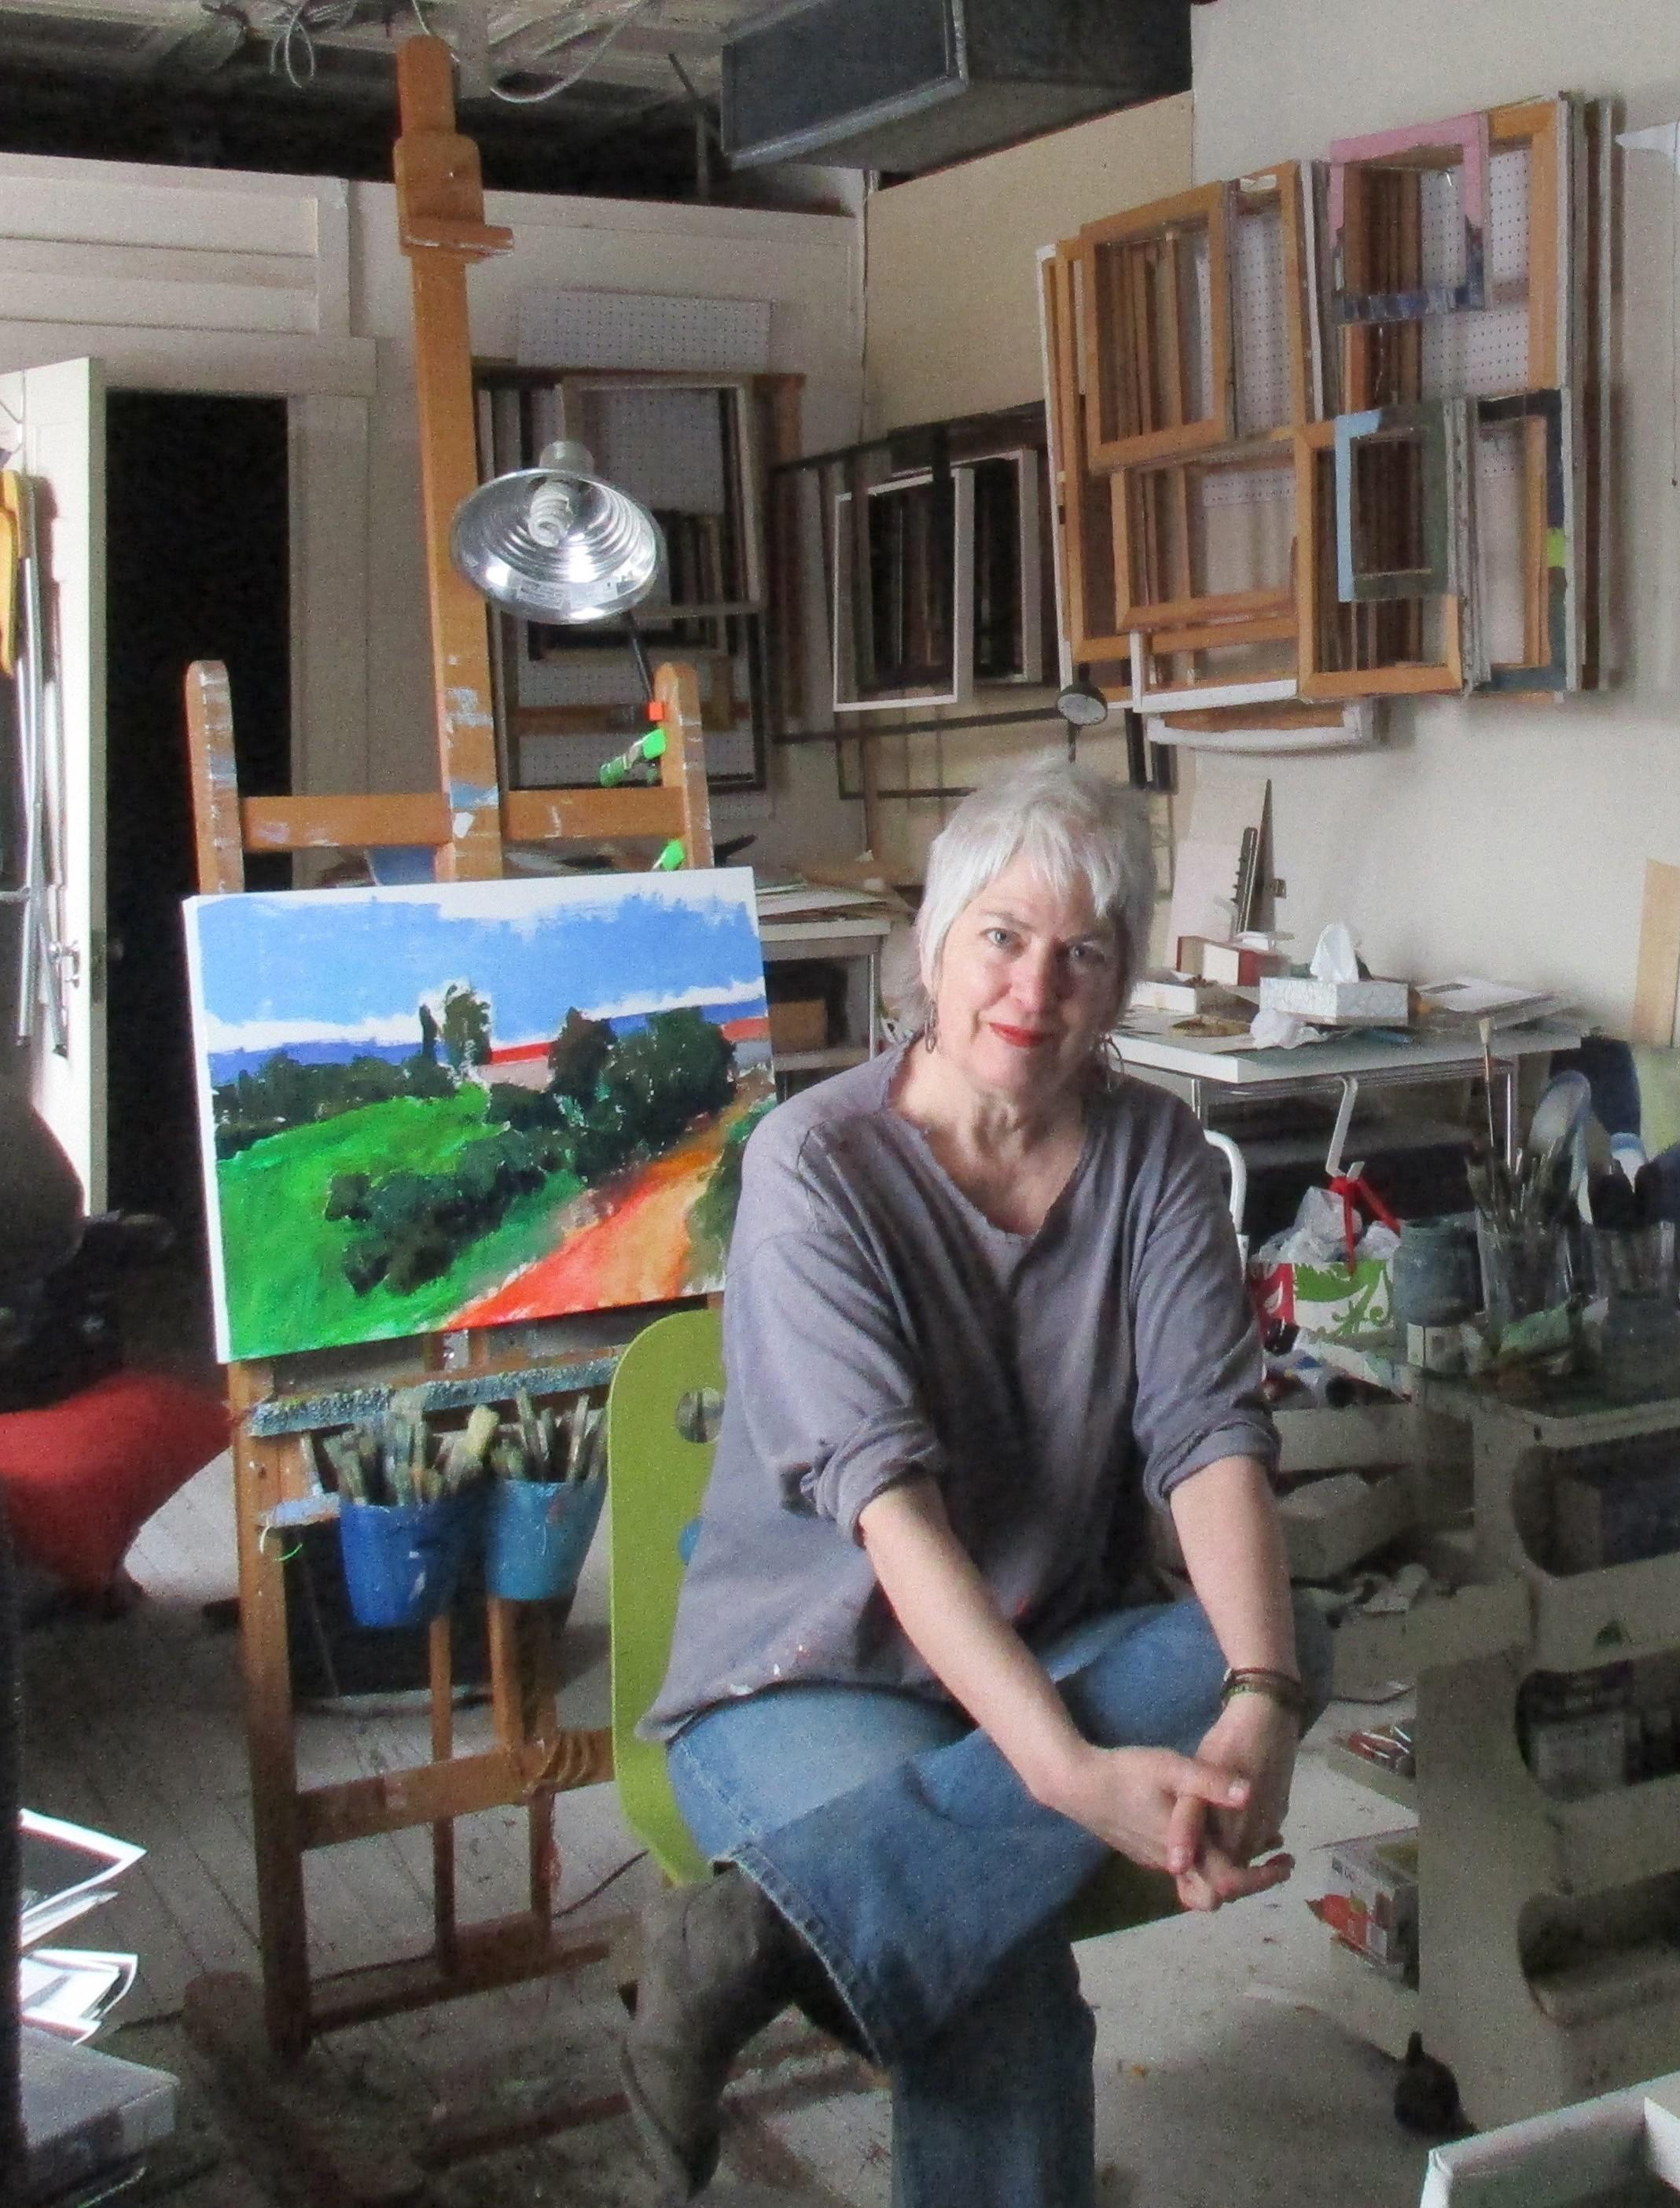 Life is Art; the travels of Suffern artist Janet Dyer